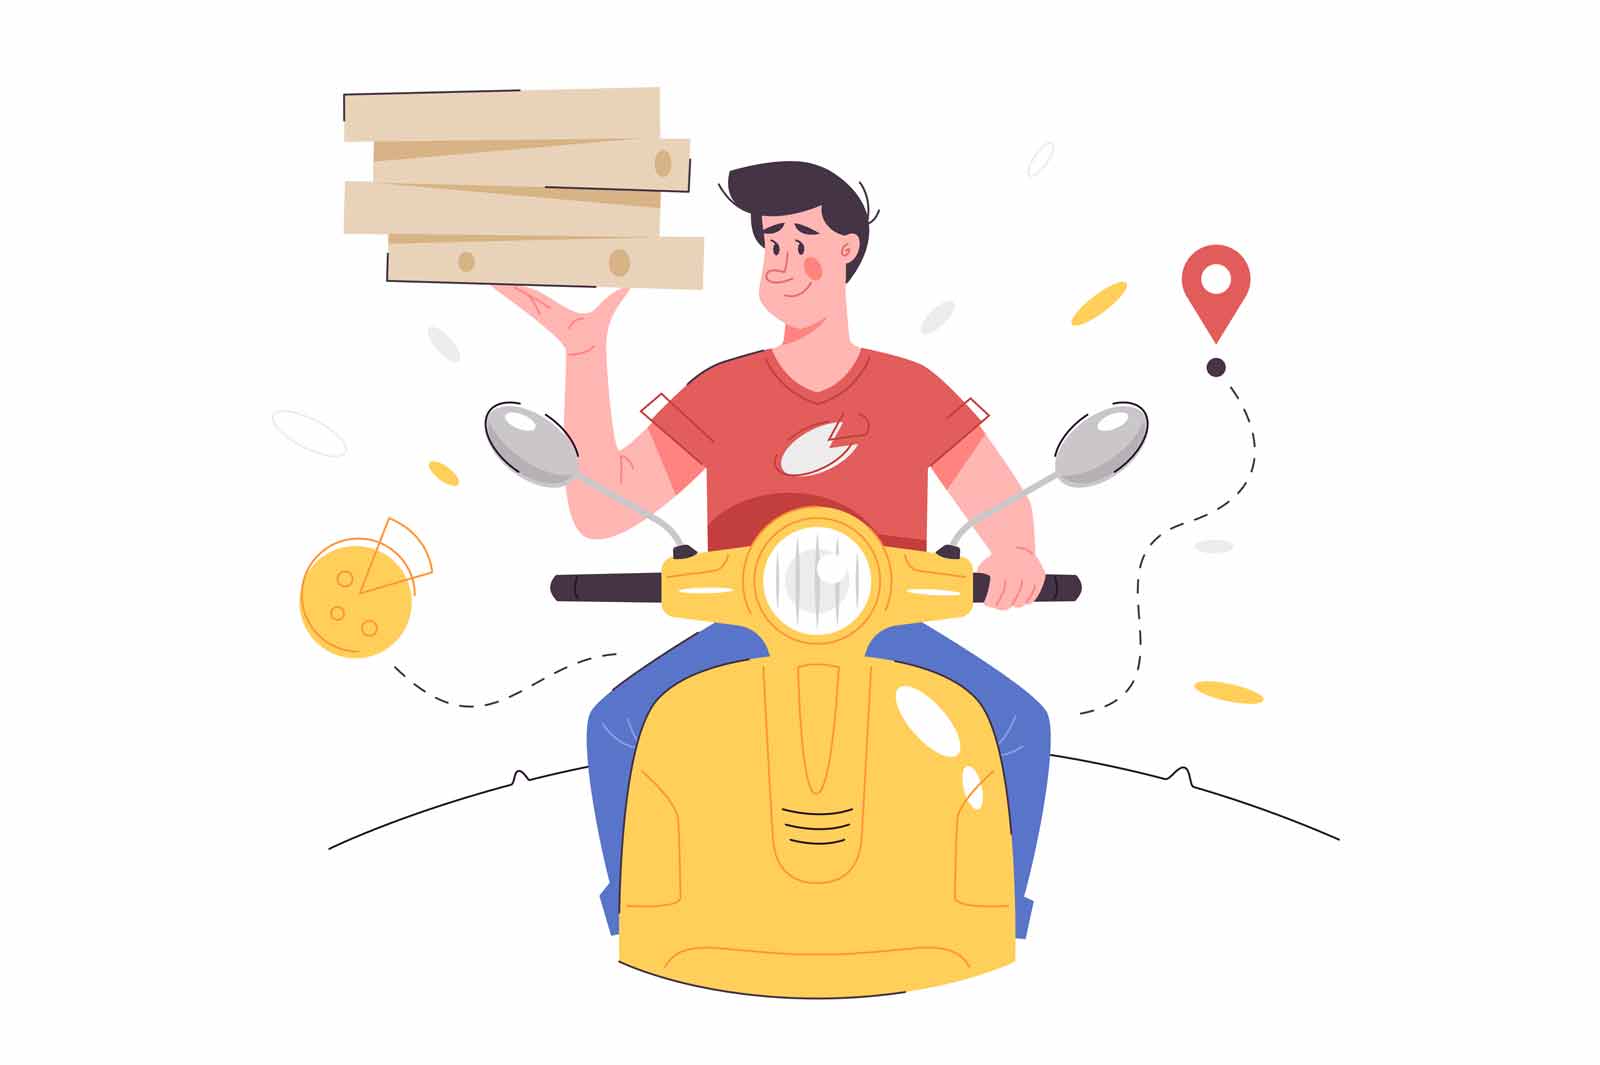 Pizza delivery by man courier on scooter with stack of pizza boxes, vector illustration. Delivery worker ride to receiver house flat style. Delivery concept